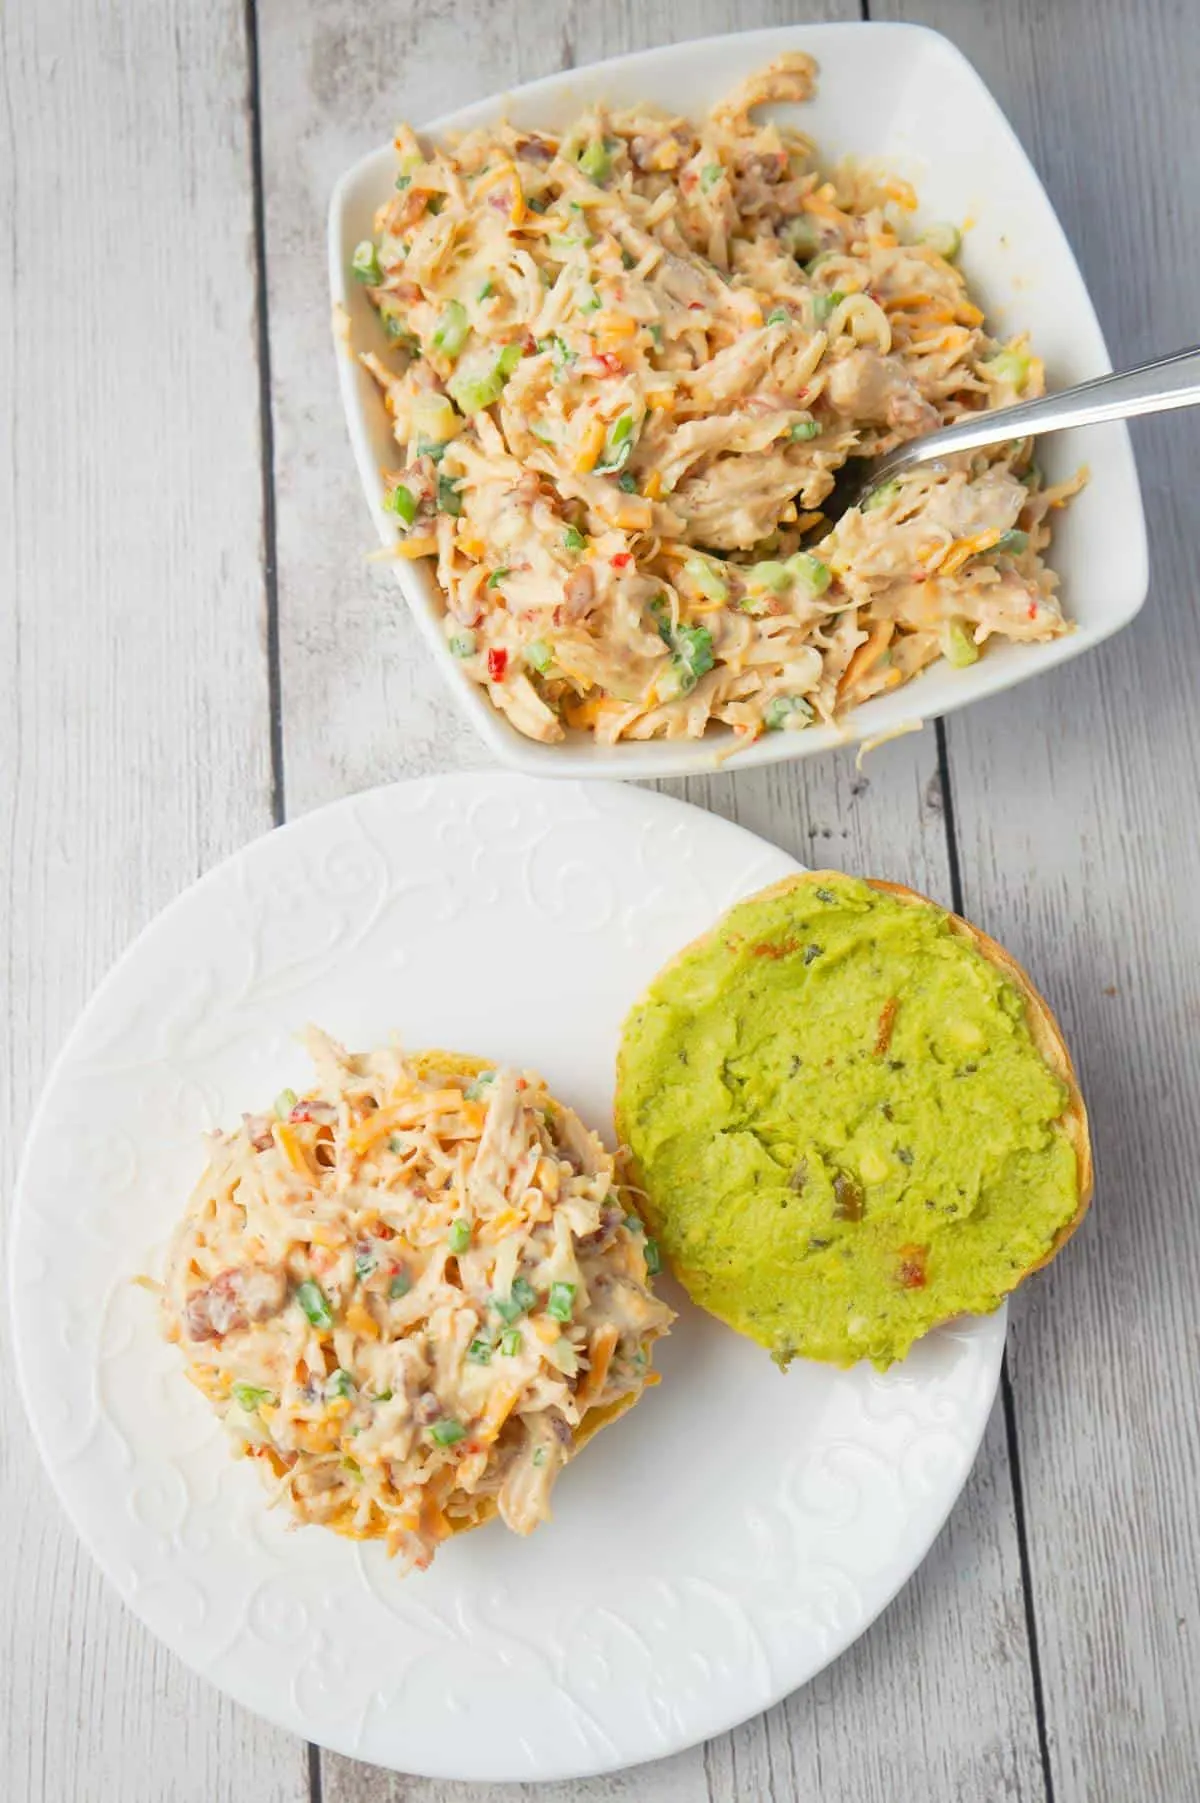 Instant Pot Sweet Chili Bacon Chicken Salad Sandwiches are easy lunch or weeknight dinner recipe using boneless, skinless chicken breasts cooked in the Instant Pot and then tossed with mayo, Thai sweet chili sauce, green onions, crumbled bacon and cheese.